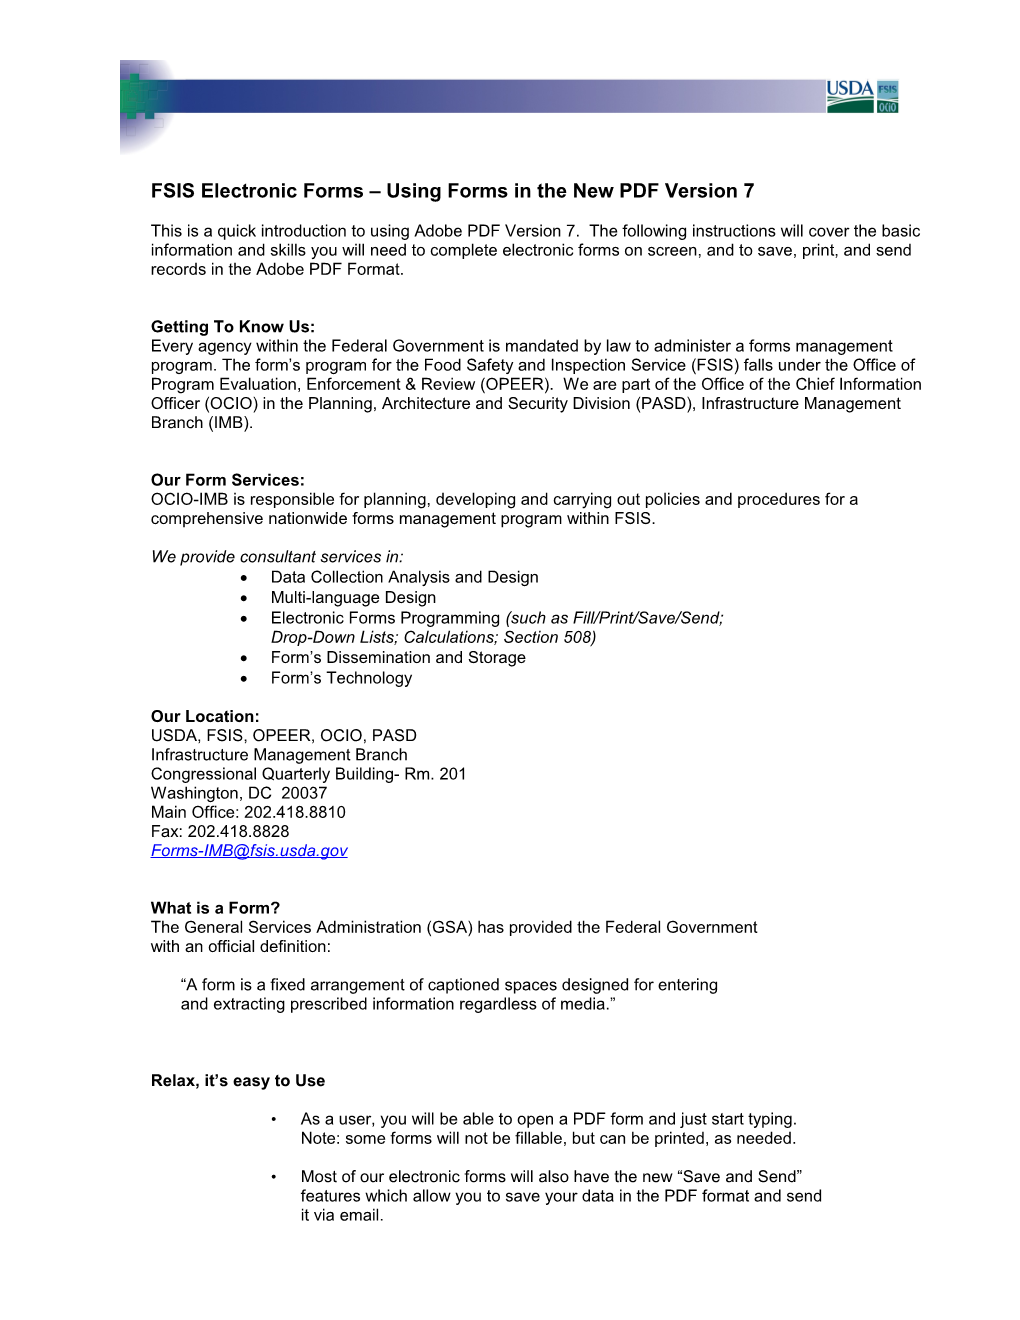 FSIS Electronic Forms Using Forms in the New PDF Version 7